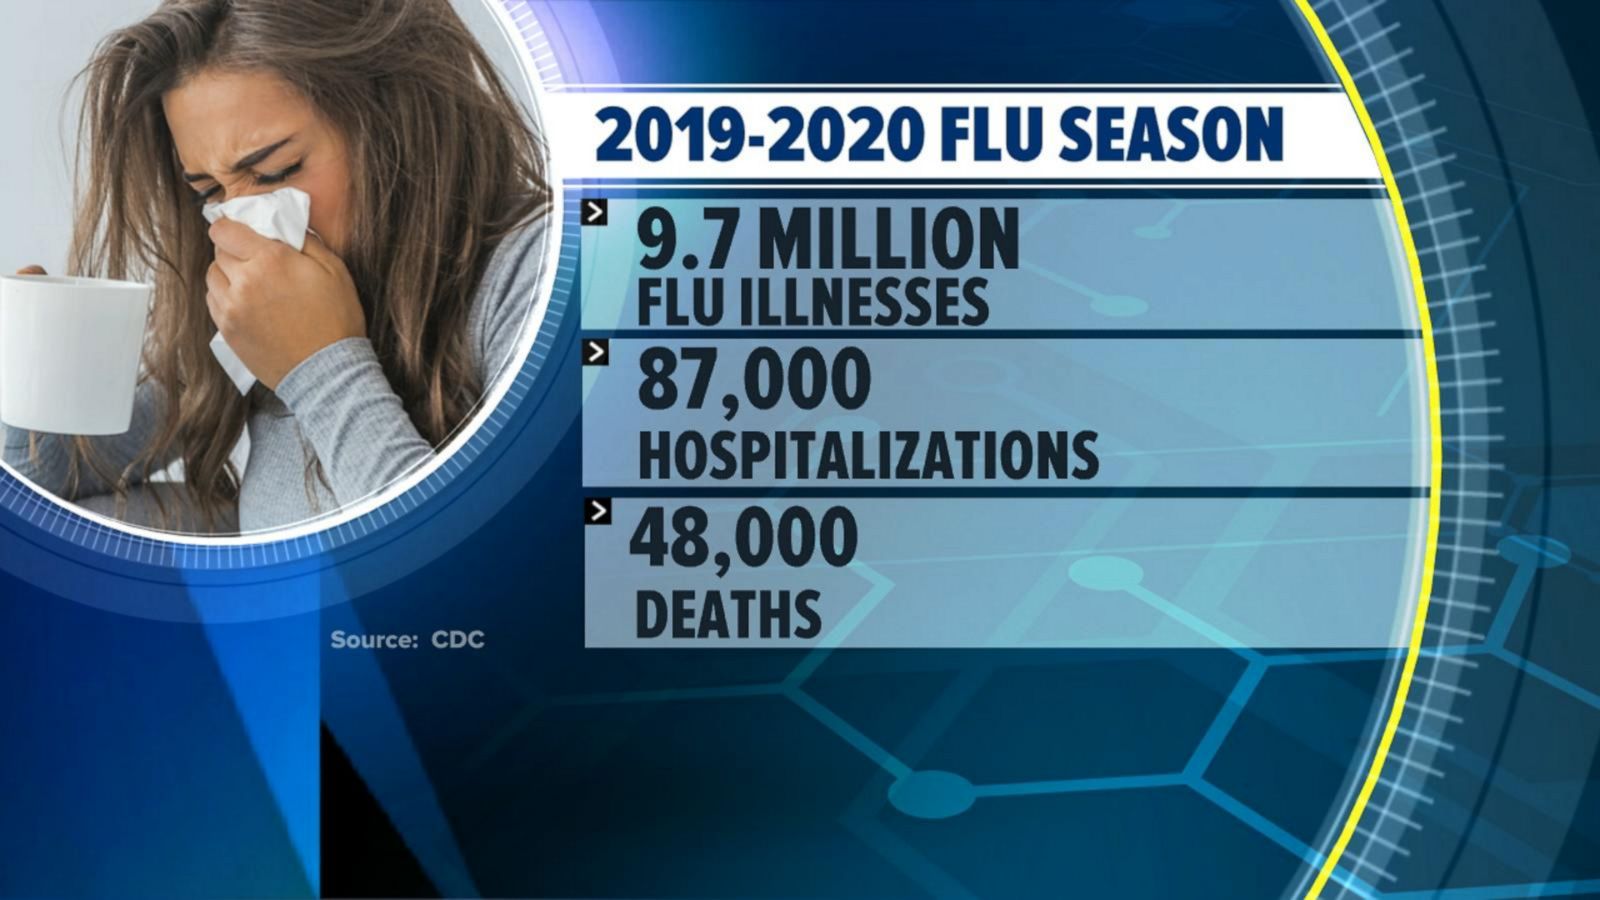 Has flu season peaked or will cases continue to increase? Good